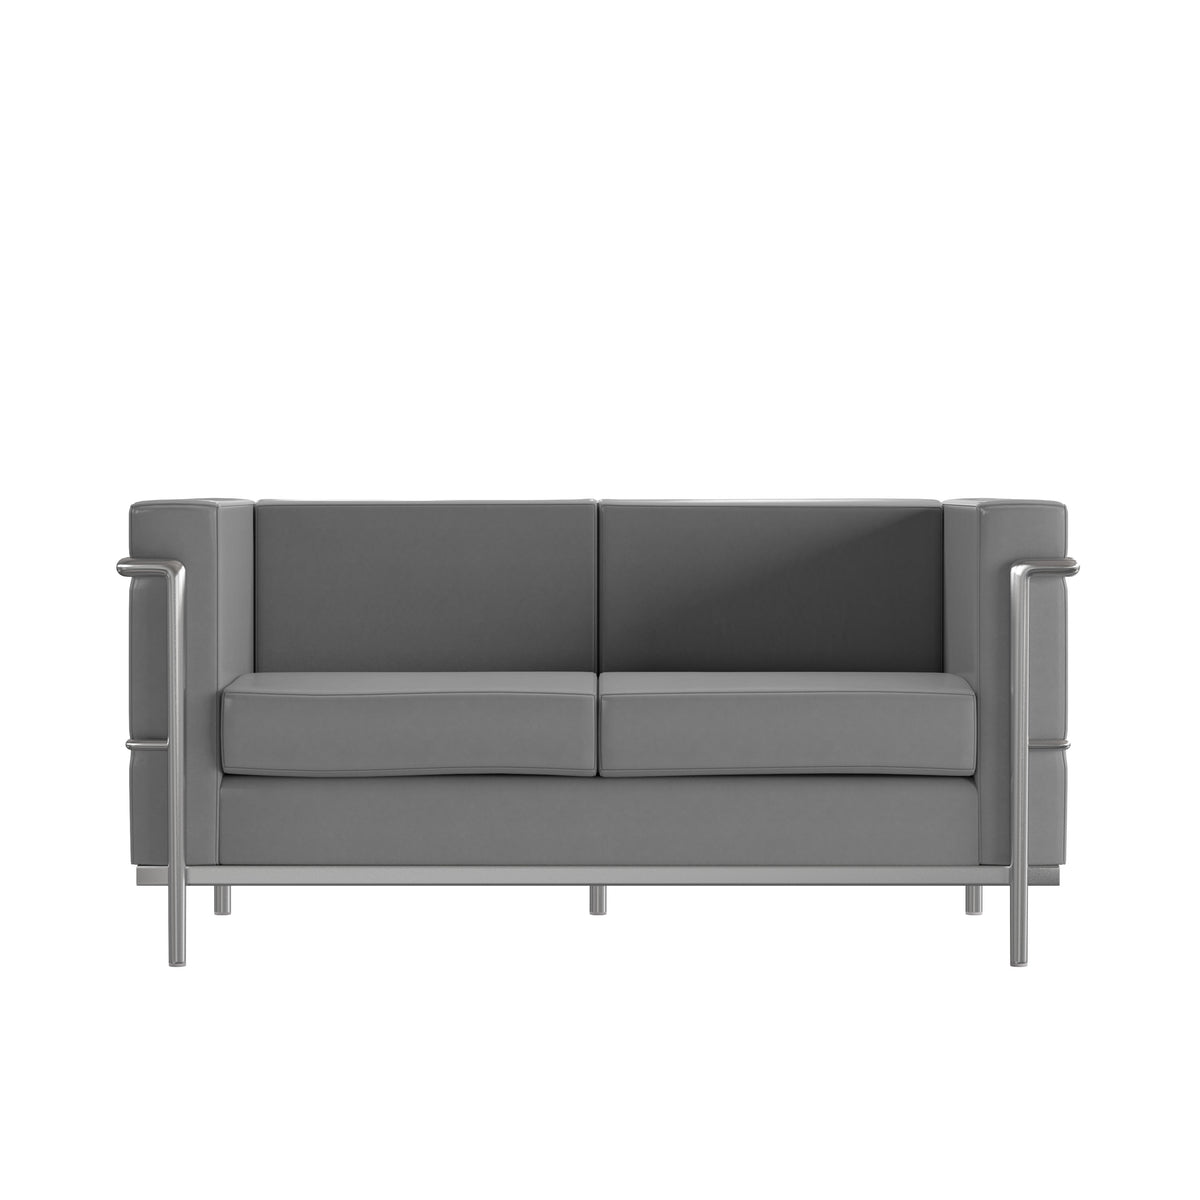 Gray |#| Contemporary Gray LeatherSoft Loveseat with Double Bar Encasing Frame